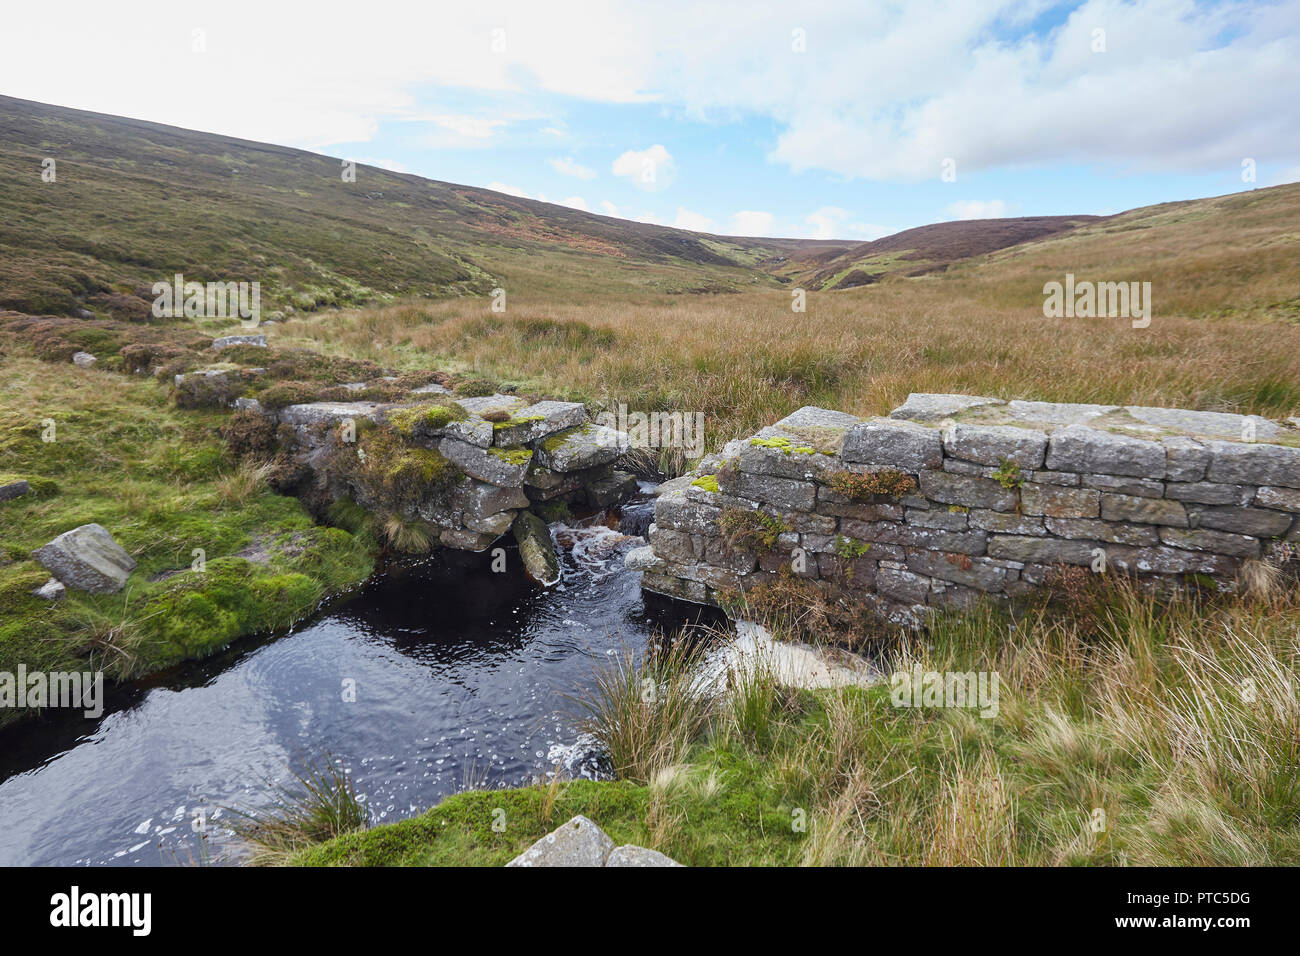 Remains of the Blakethwaite mining dams part of the upper Gunnerside Gill lead mining industry water management system which supplied the dressing flo Stock Photo